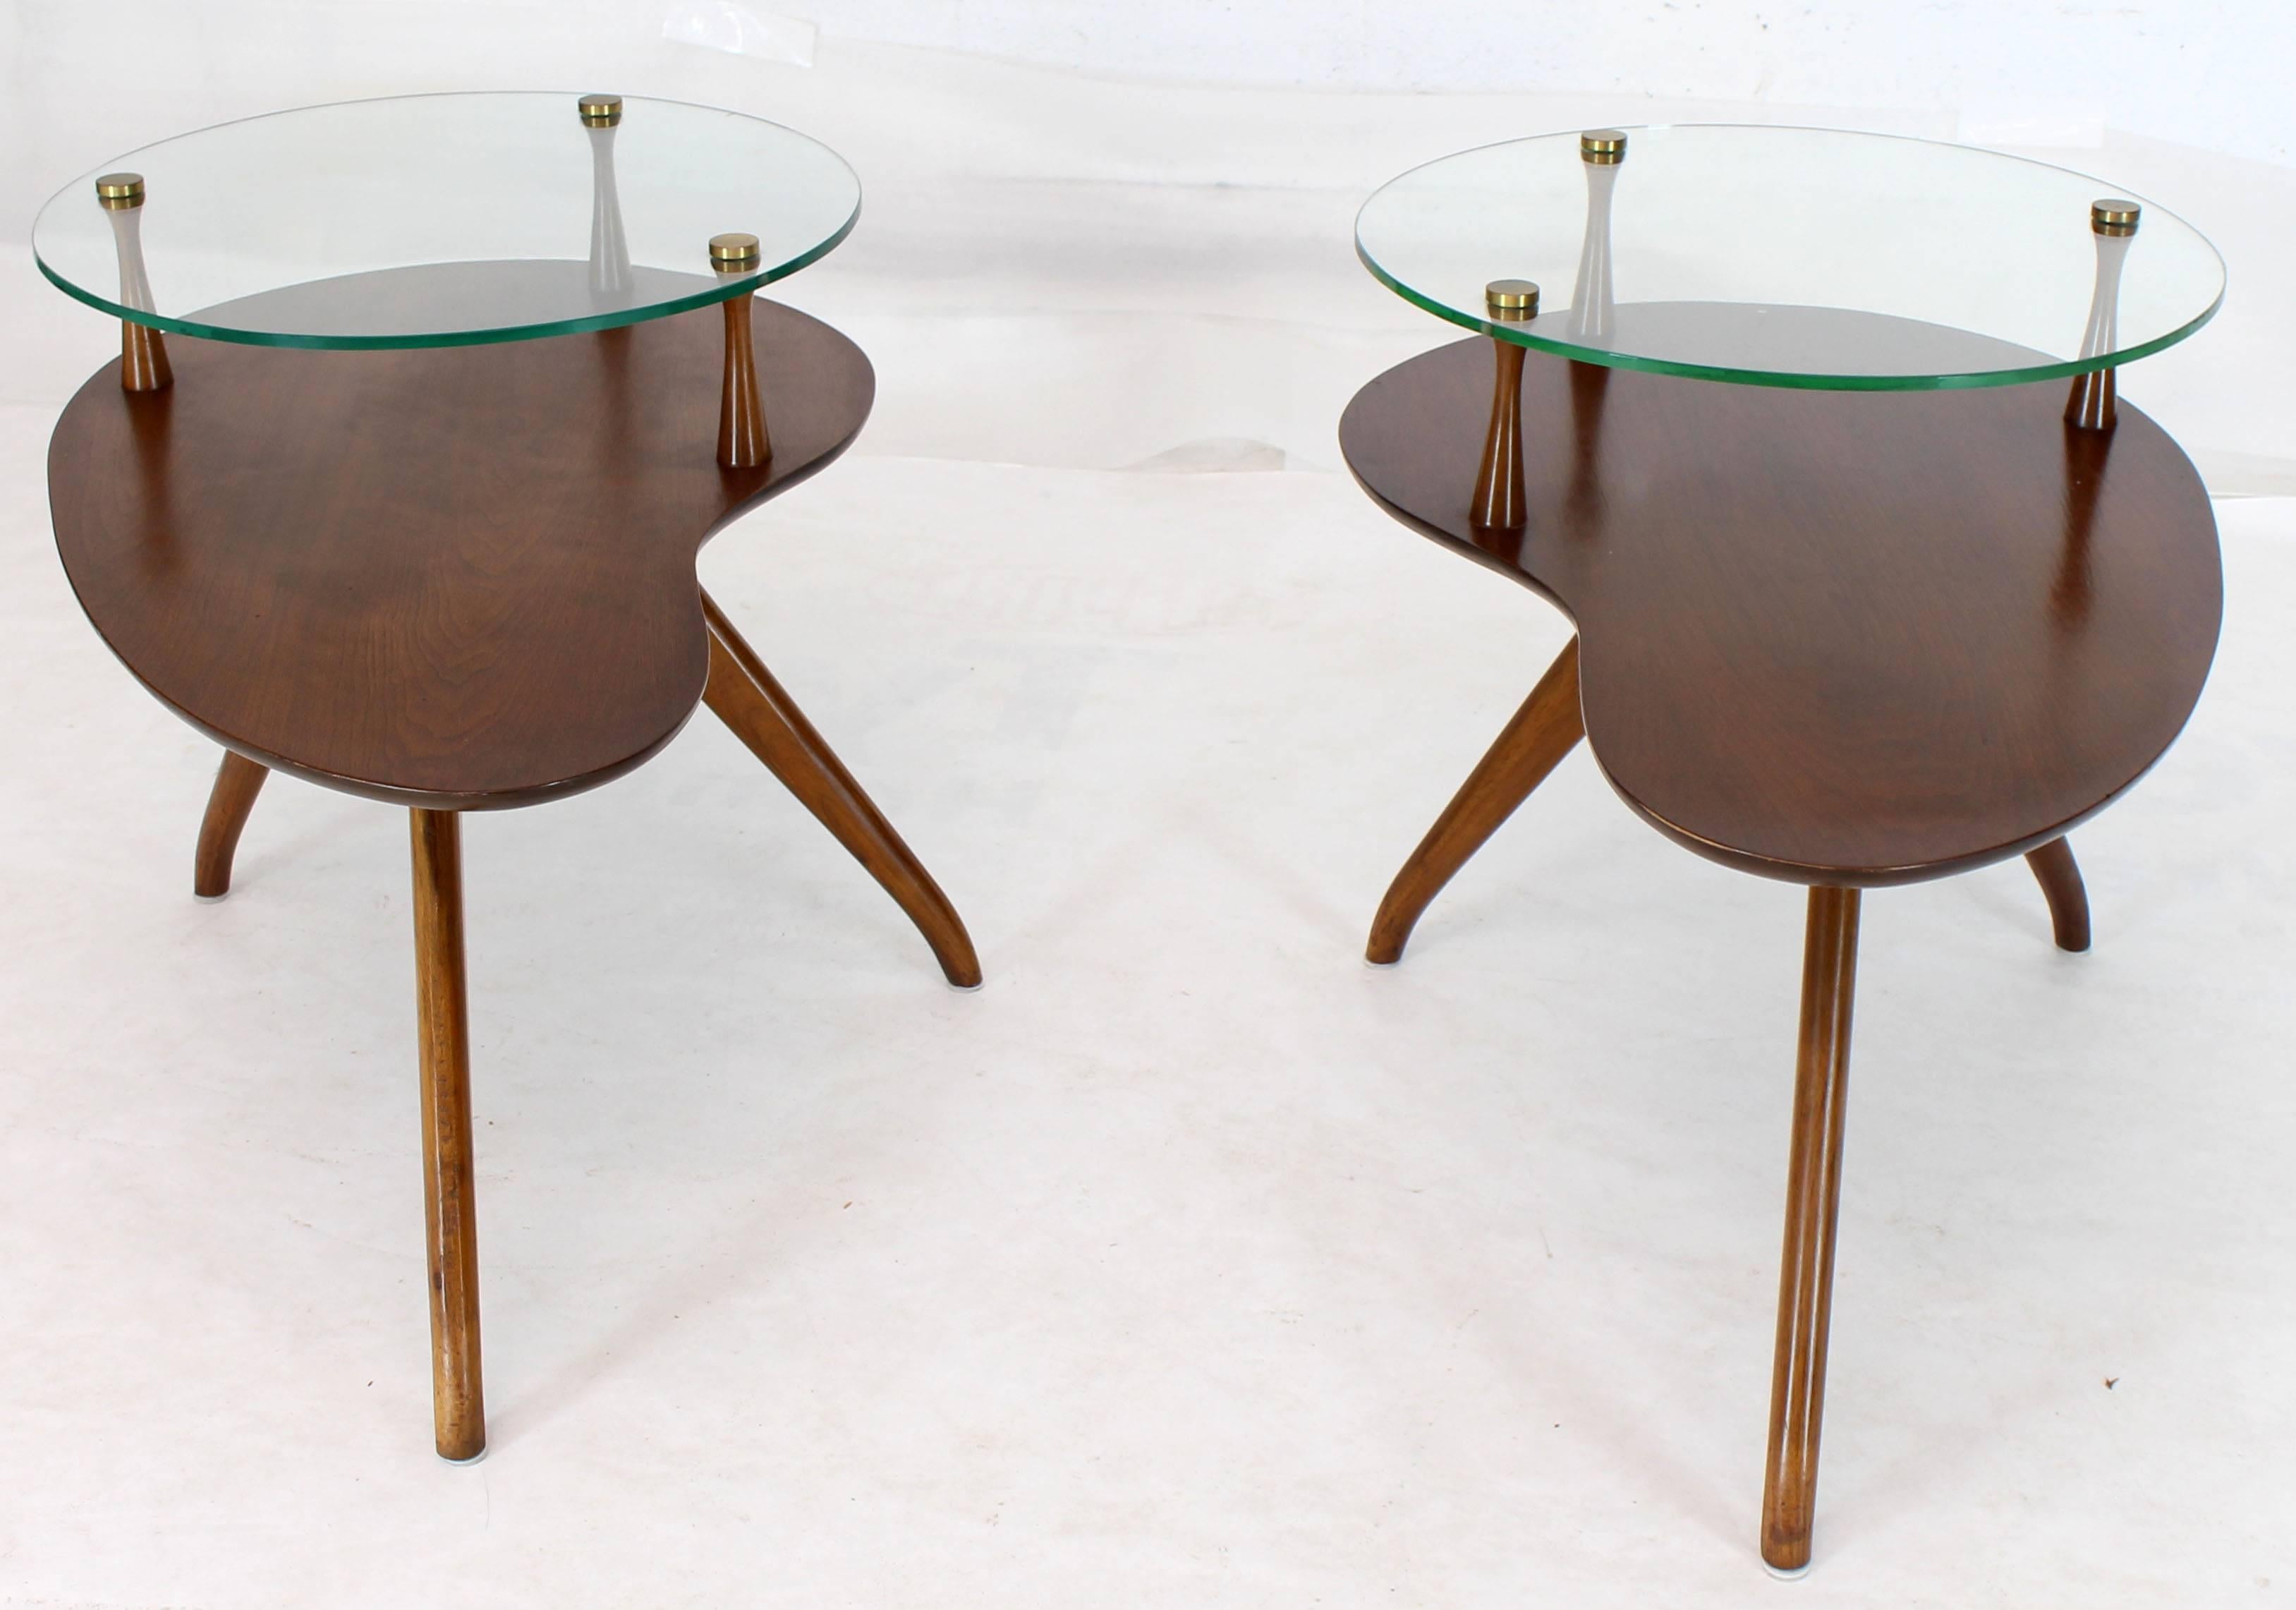 Lacquered walnut round glass galleries organic kidney shape side tables.